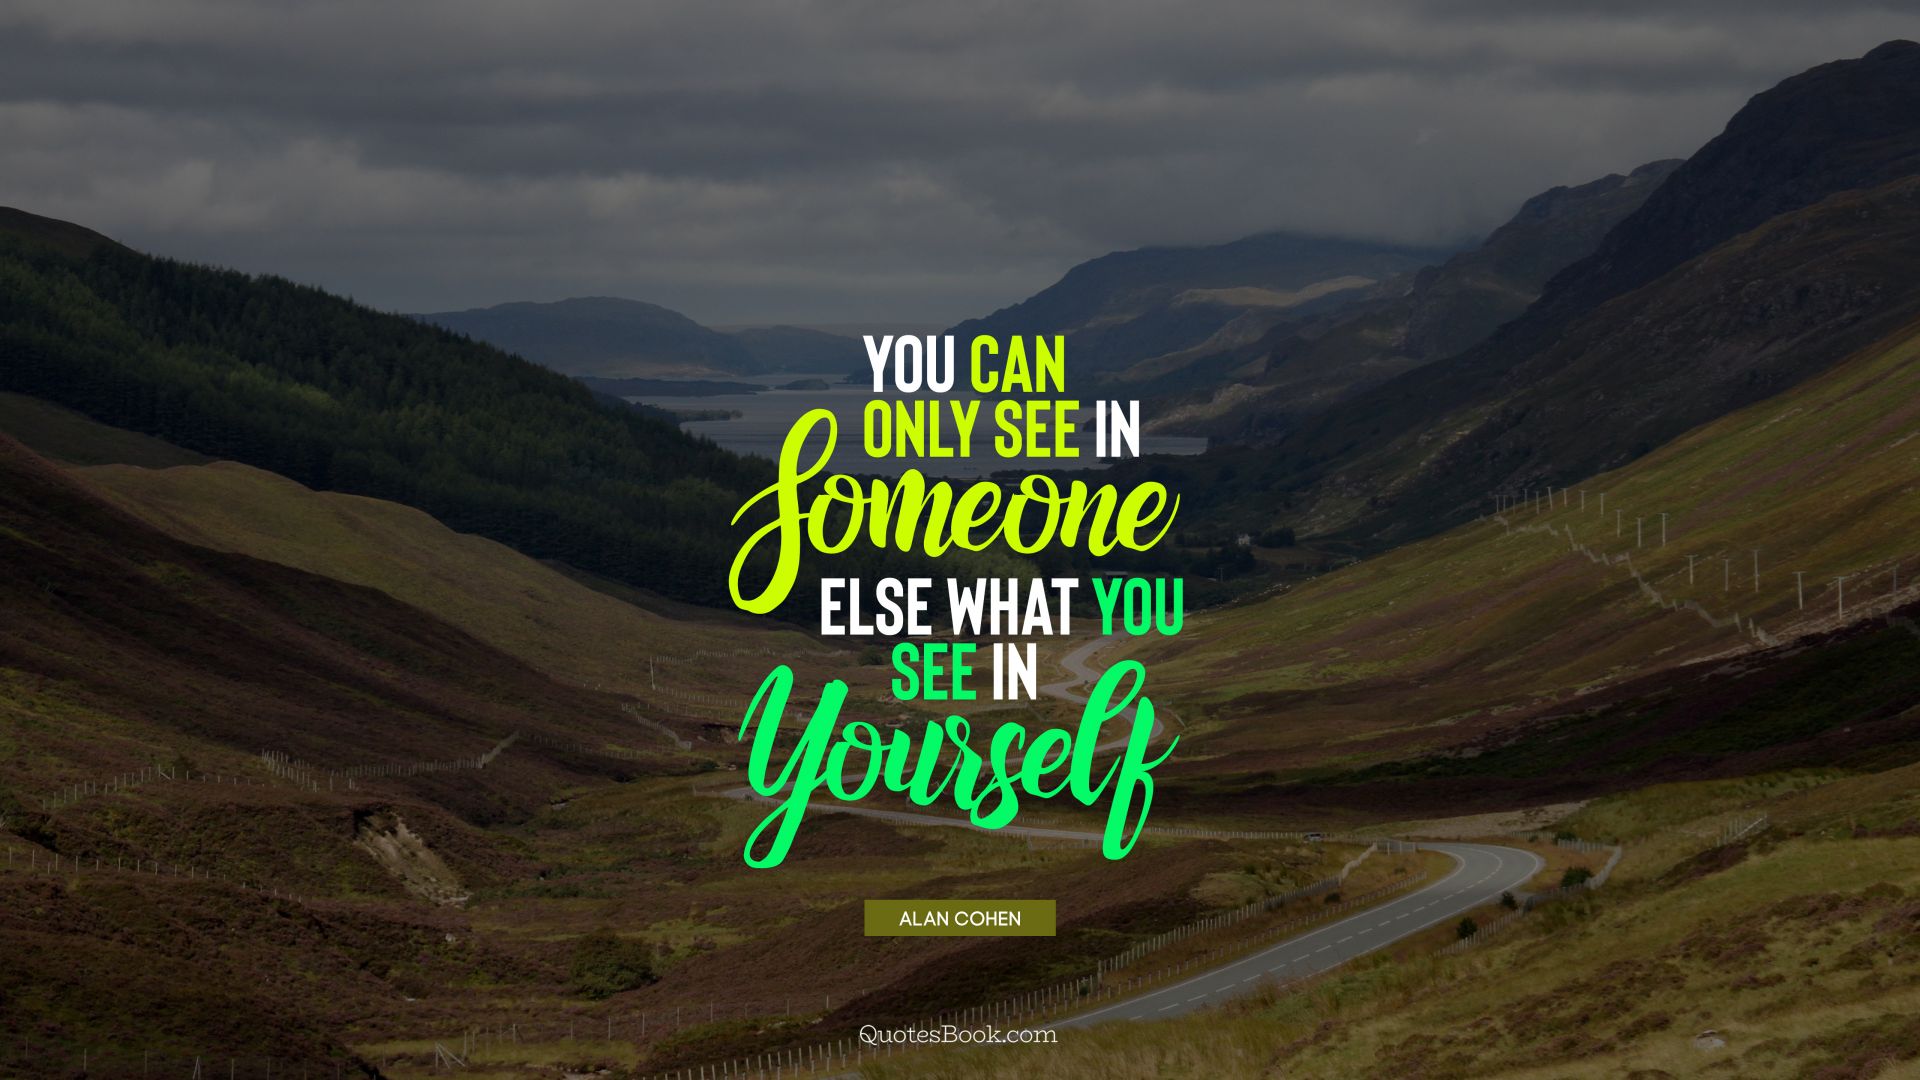 You can only see in someone else what you see in yourself. - Quote by Alan Cohen